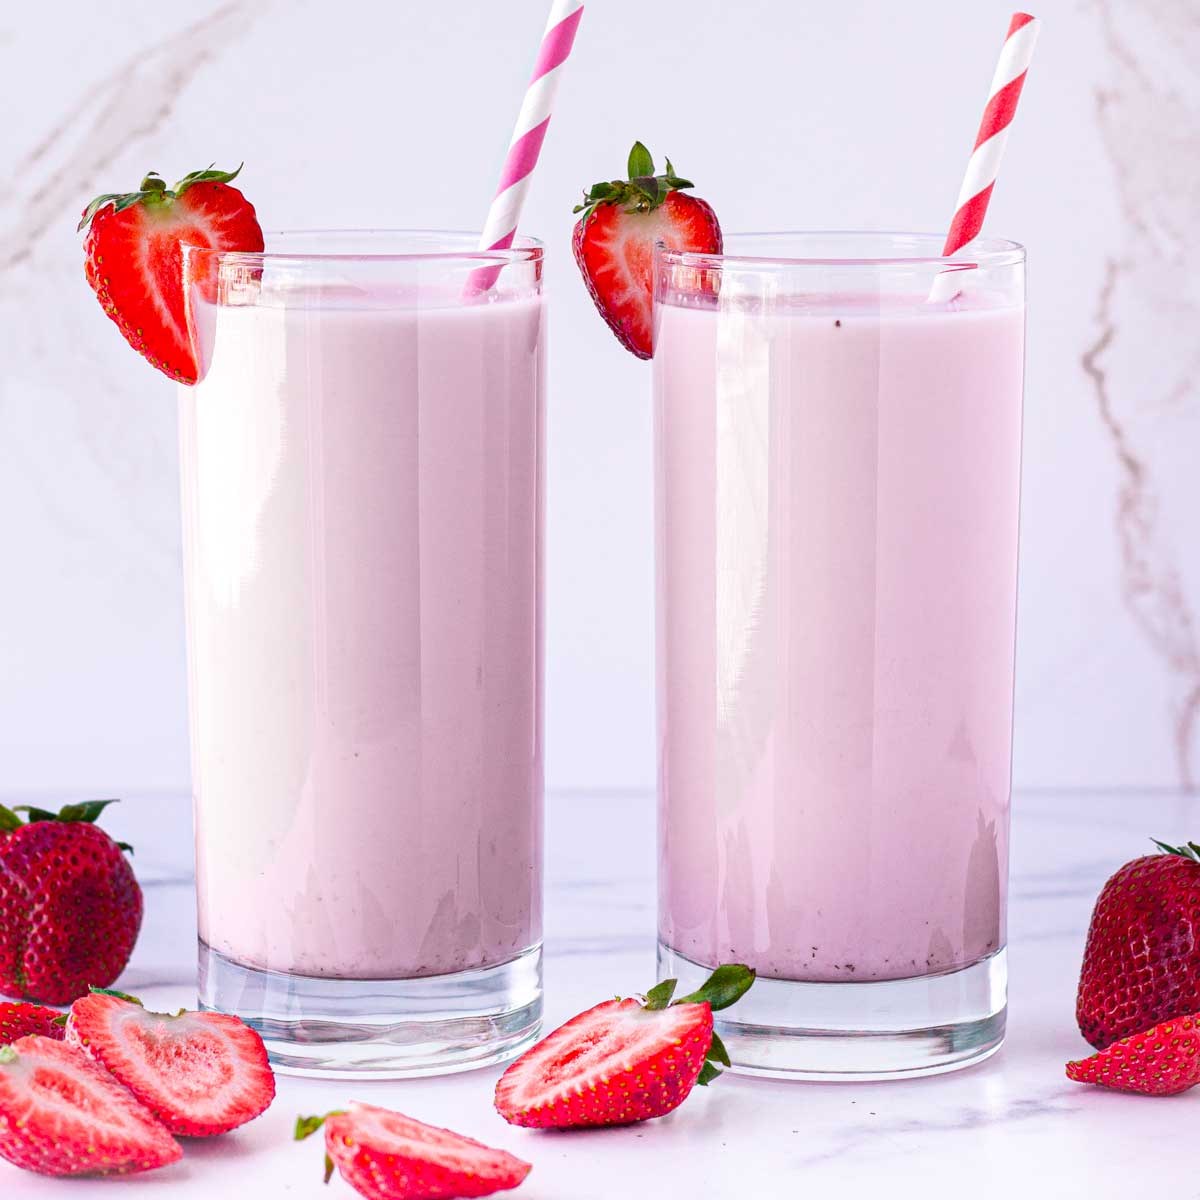 10-strawberry-milk-nutrition-facts